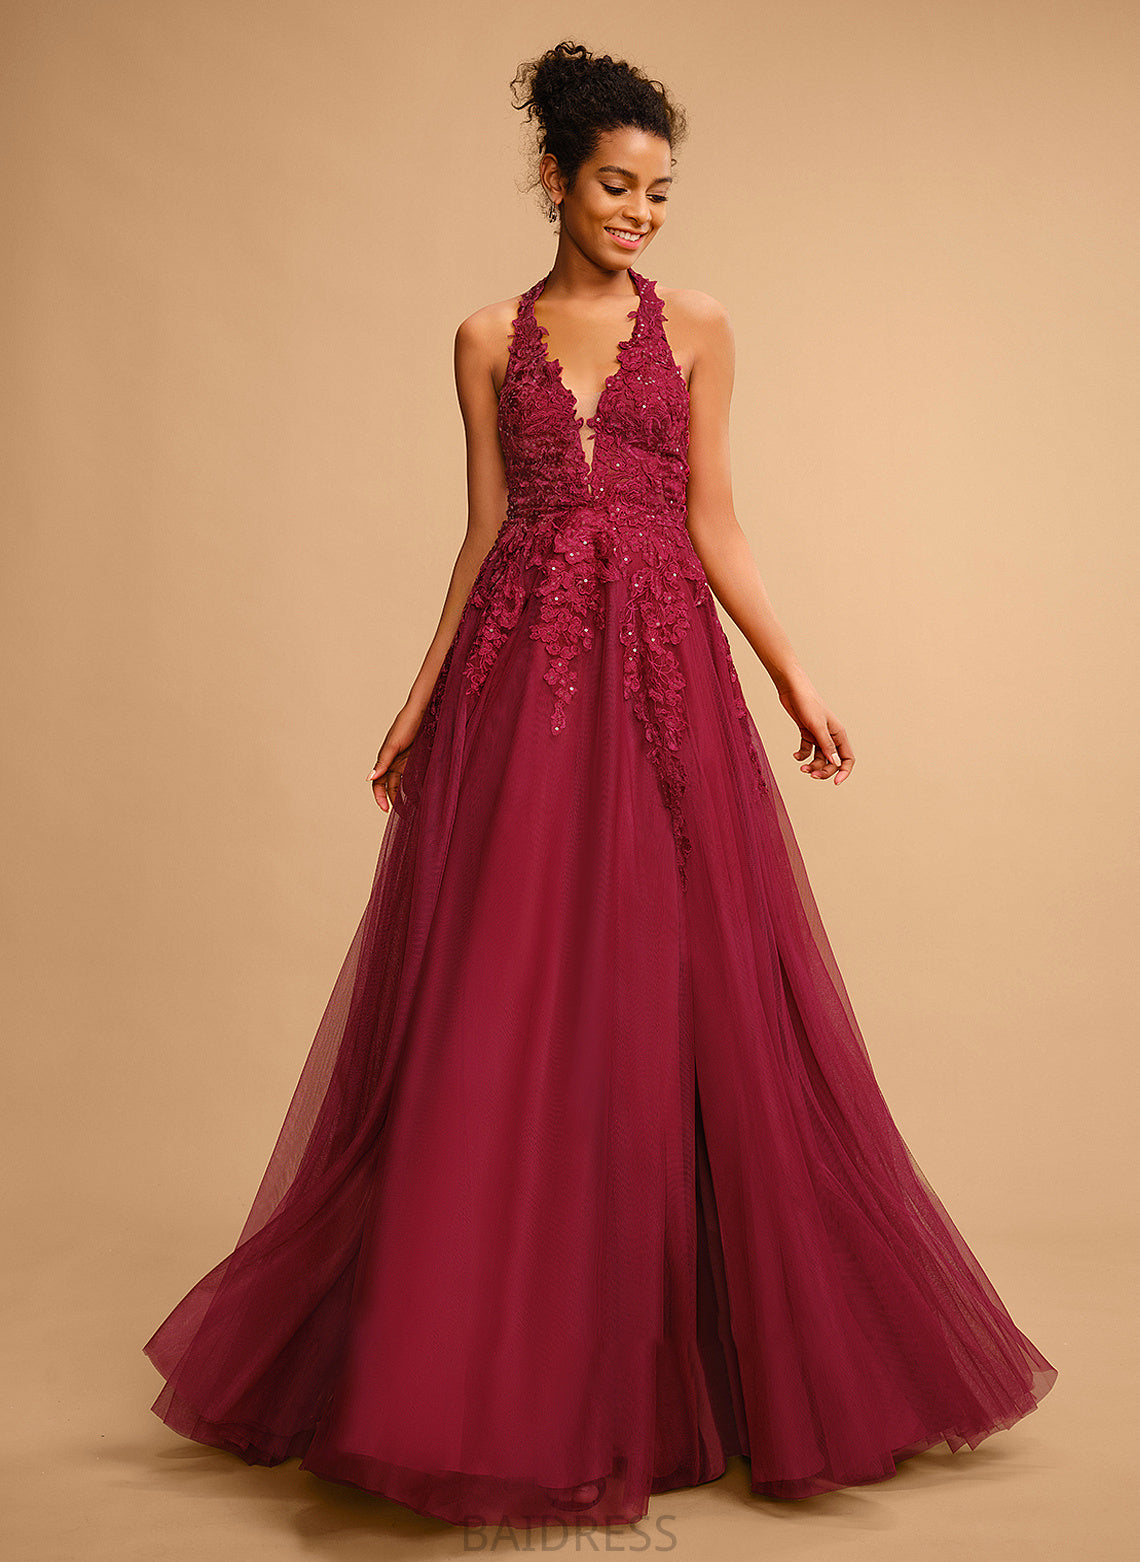 Tulle Halter Neveah Lace Ball-Gown/Princess Prom Dresses Sequins Floor-Length With